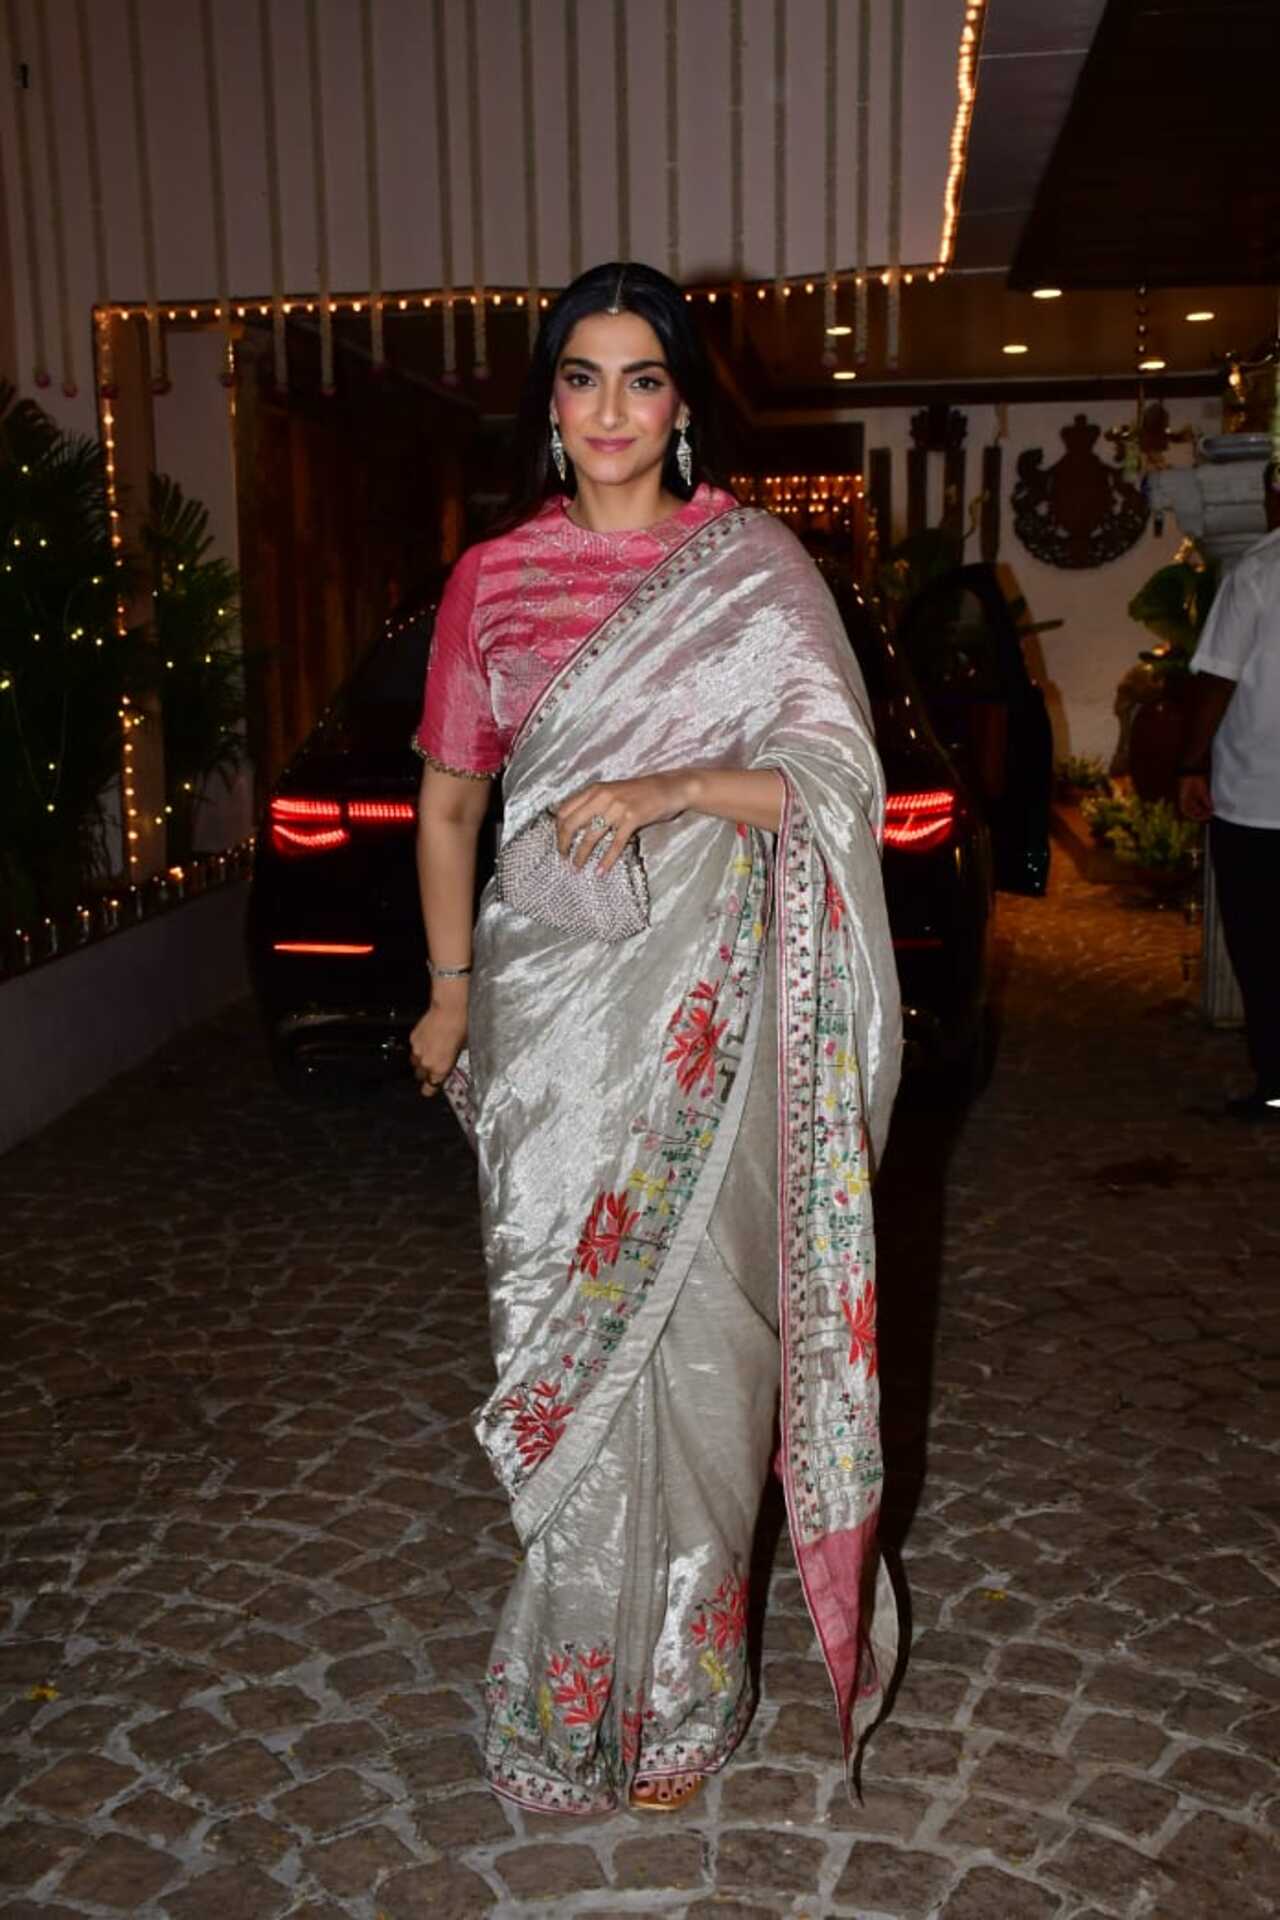 Sonam Kapoor Ahuja also joined the festivities this year. Dressed in a silver saree with pink blouse, the 'Neerja' star looked gorgeous